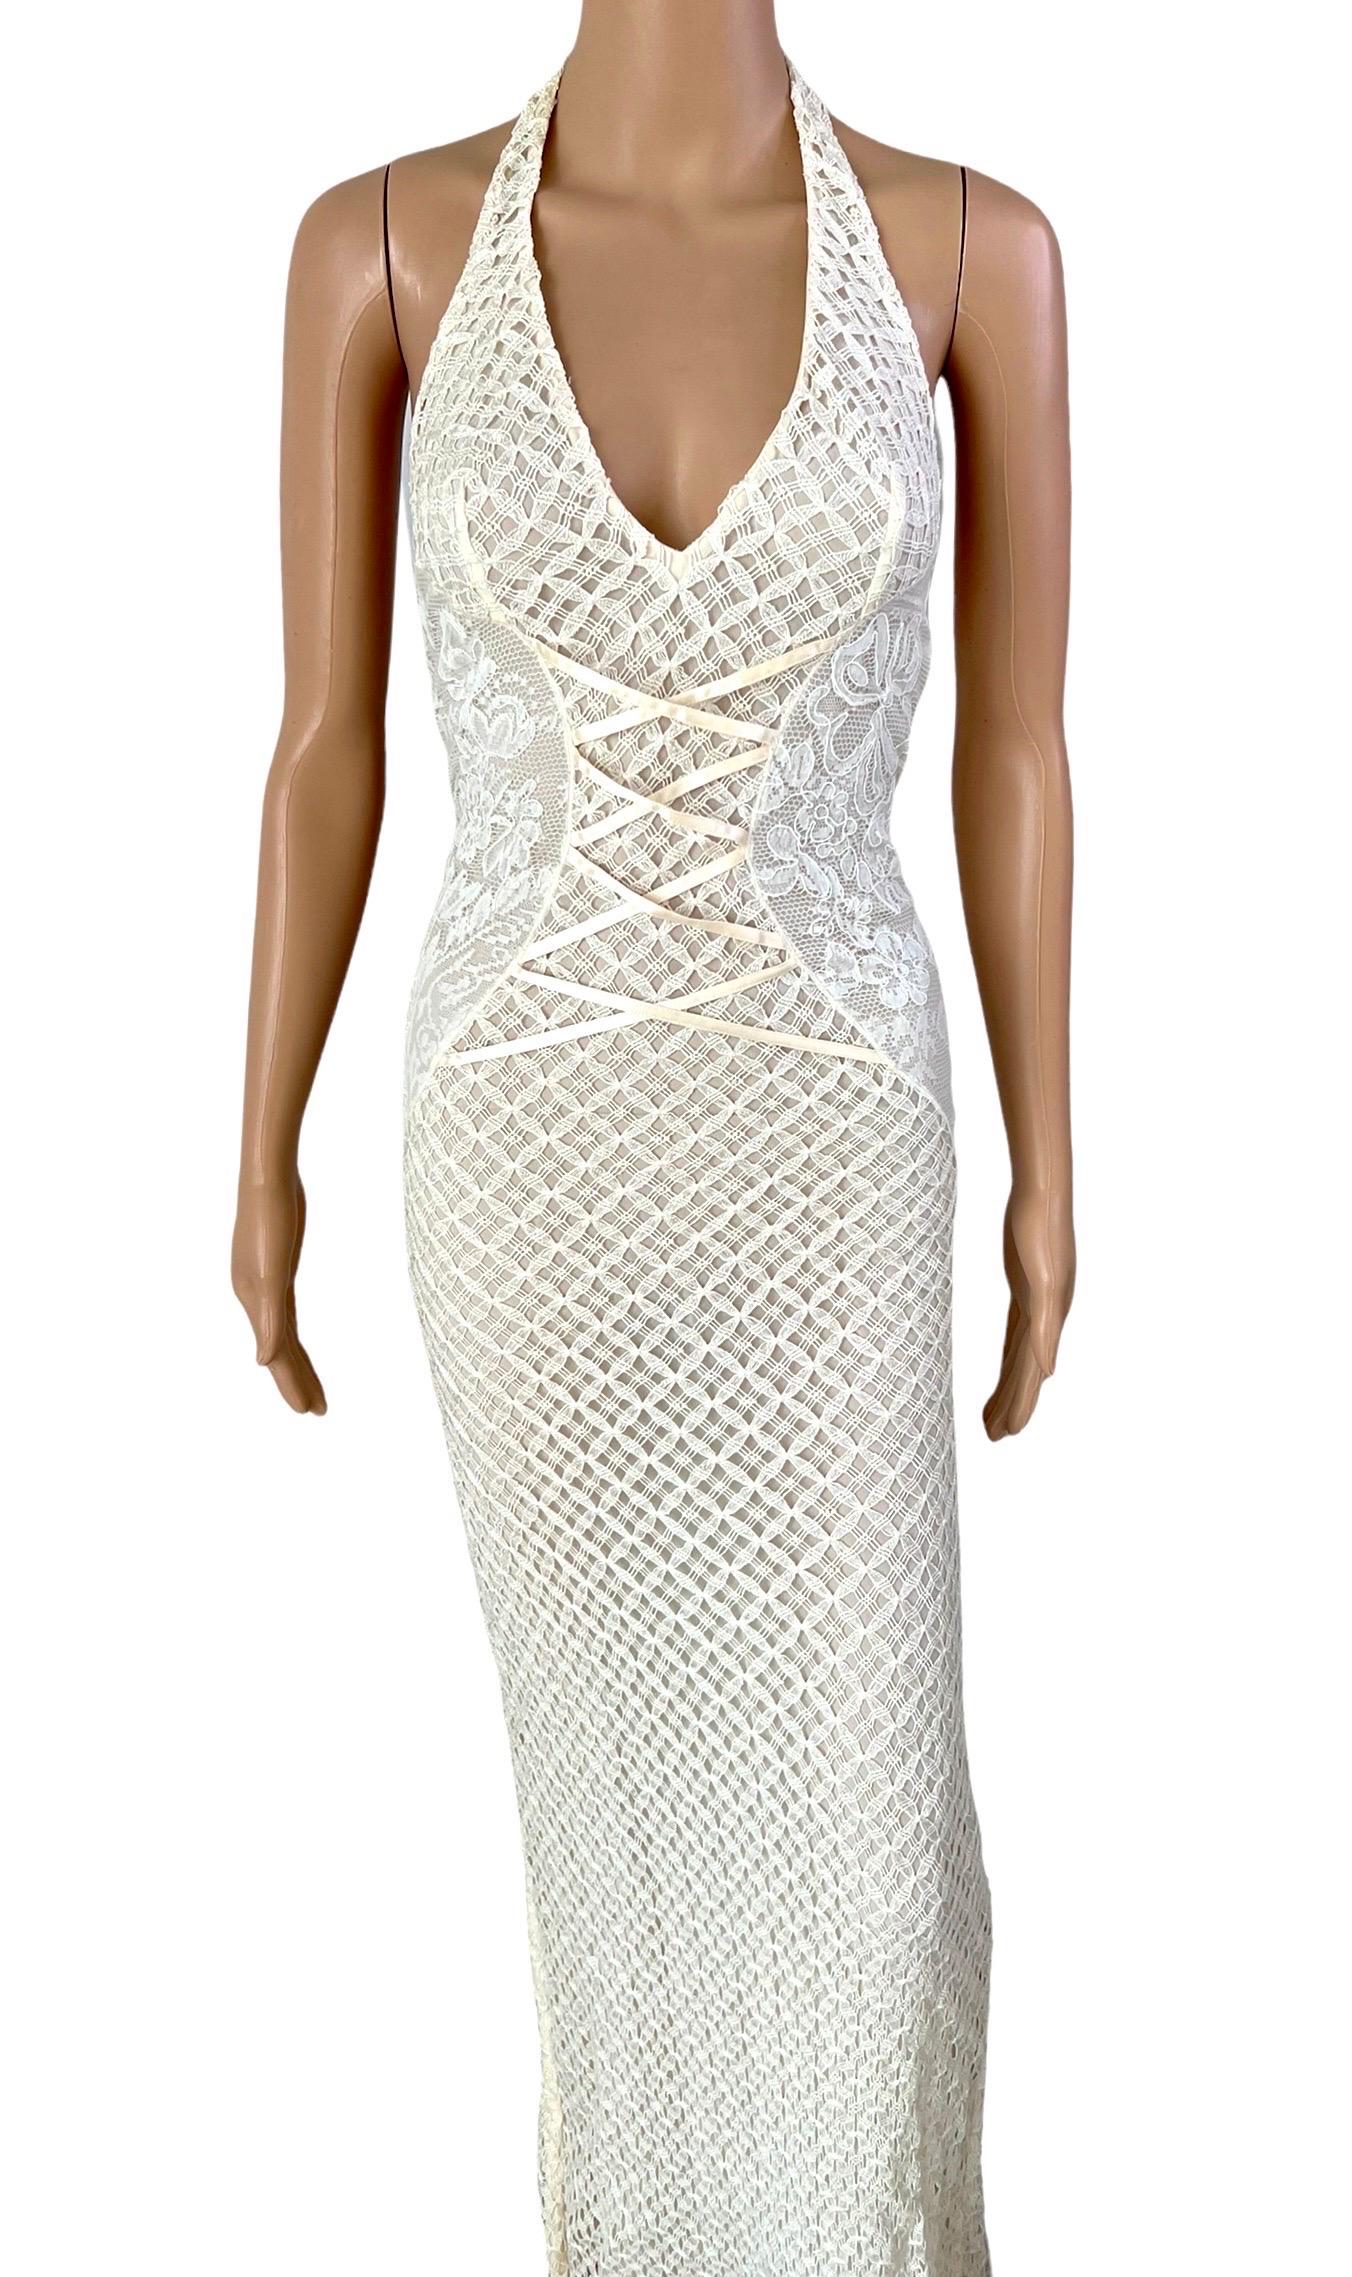 Gianni Versace S/S 2002 Plunging Backless Semi Sheer Lace Knit Ivory Dress Gown 1